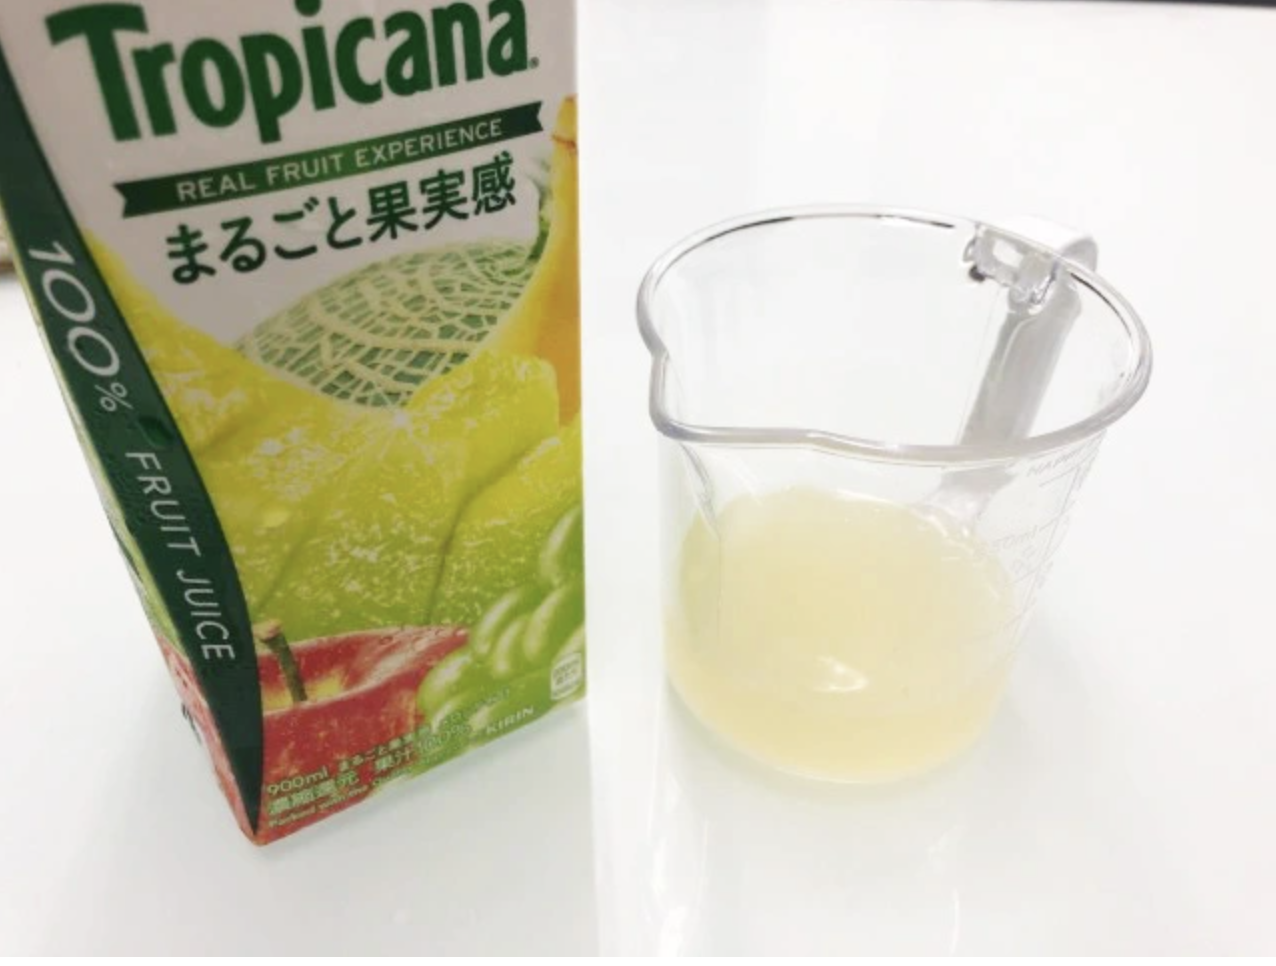 Japanese makers of Tropicana fined ¥19 million for '100% Melon' juice with only 2% melon juice